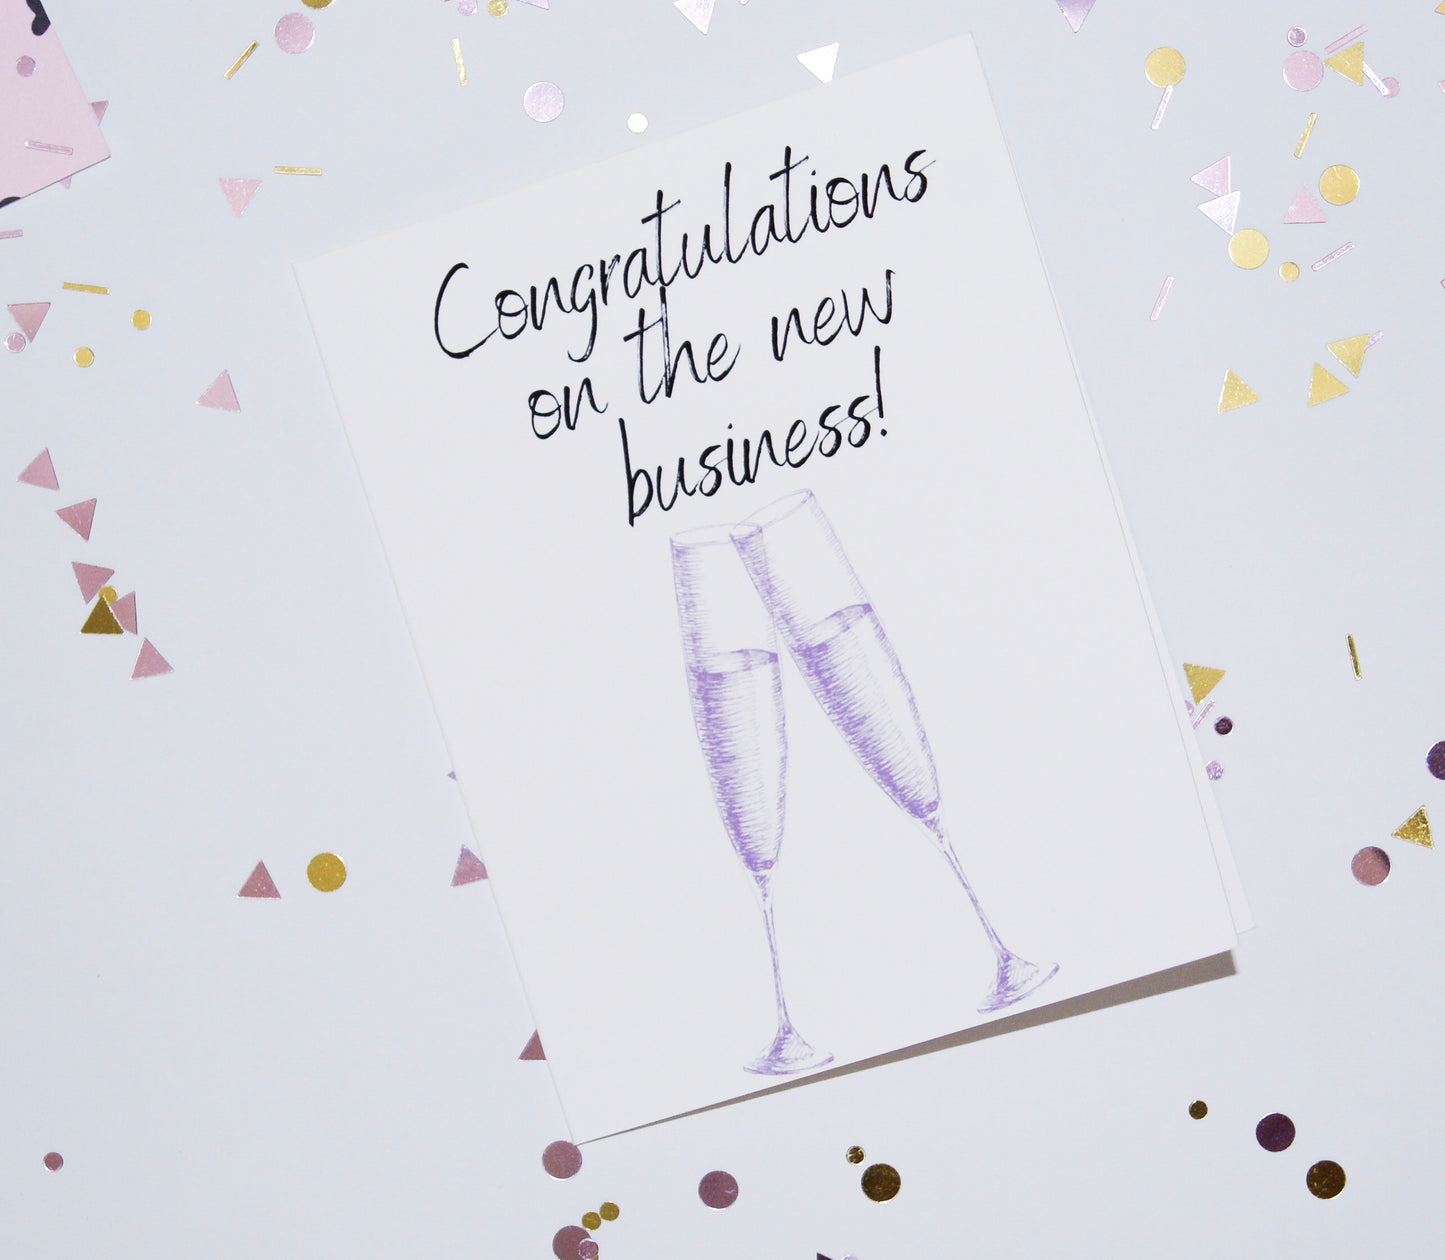 Clink, Toast, Congratulations On The New Business Encouragement Card